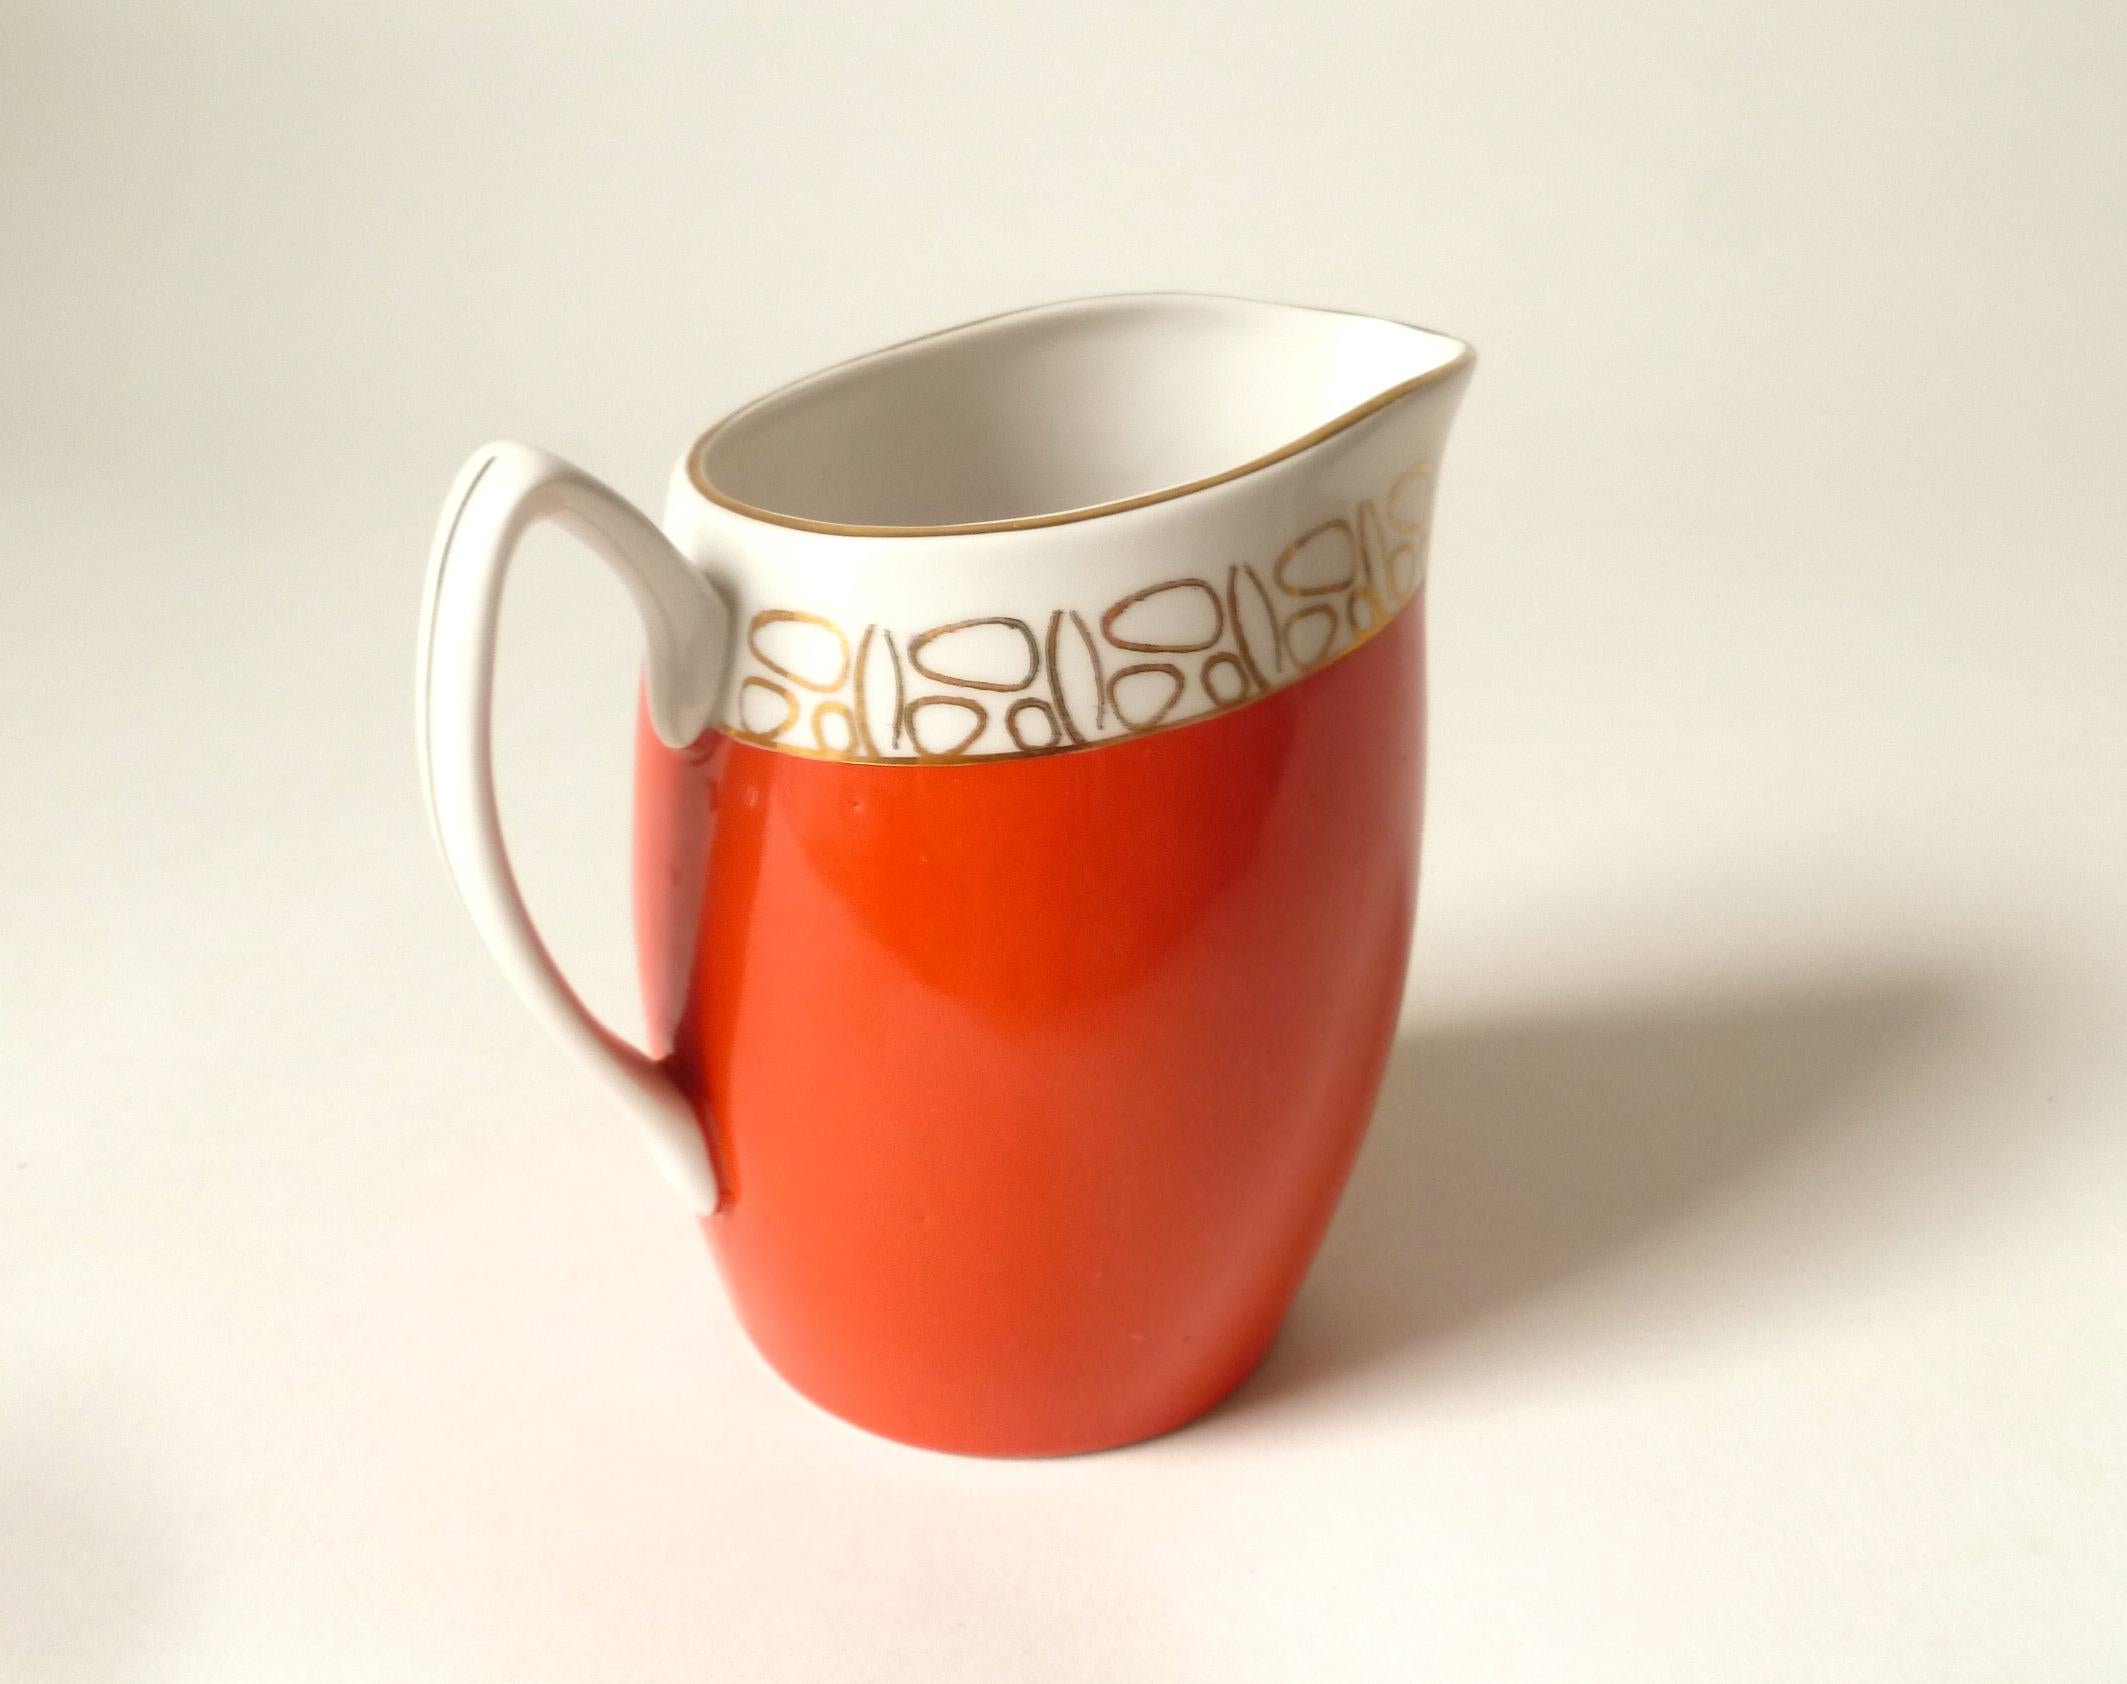 Polish porcelain creamer with gold line detailing and stylized handle. Bauhaus design in typical orange color. Made in Chodziez/Cmielow porcelain factory.

Very good vintage condition without chips/cracks. Very, very light wear.